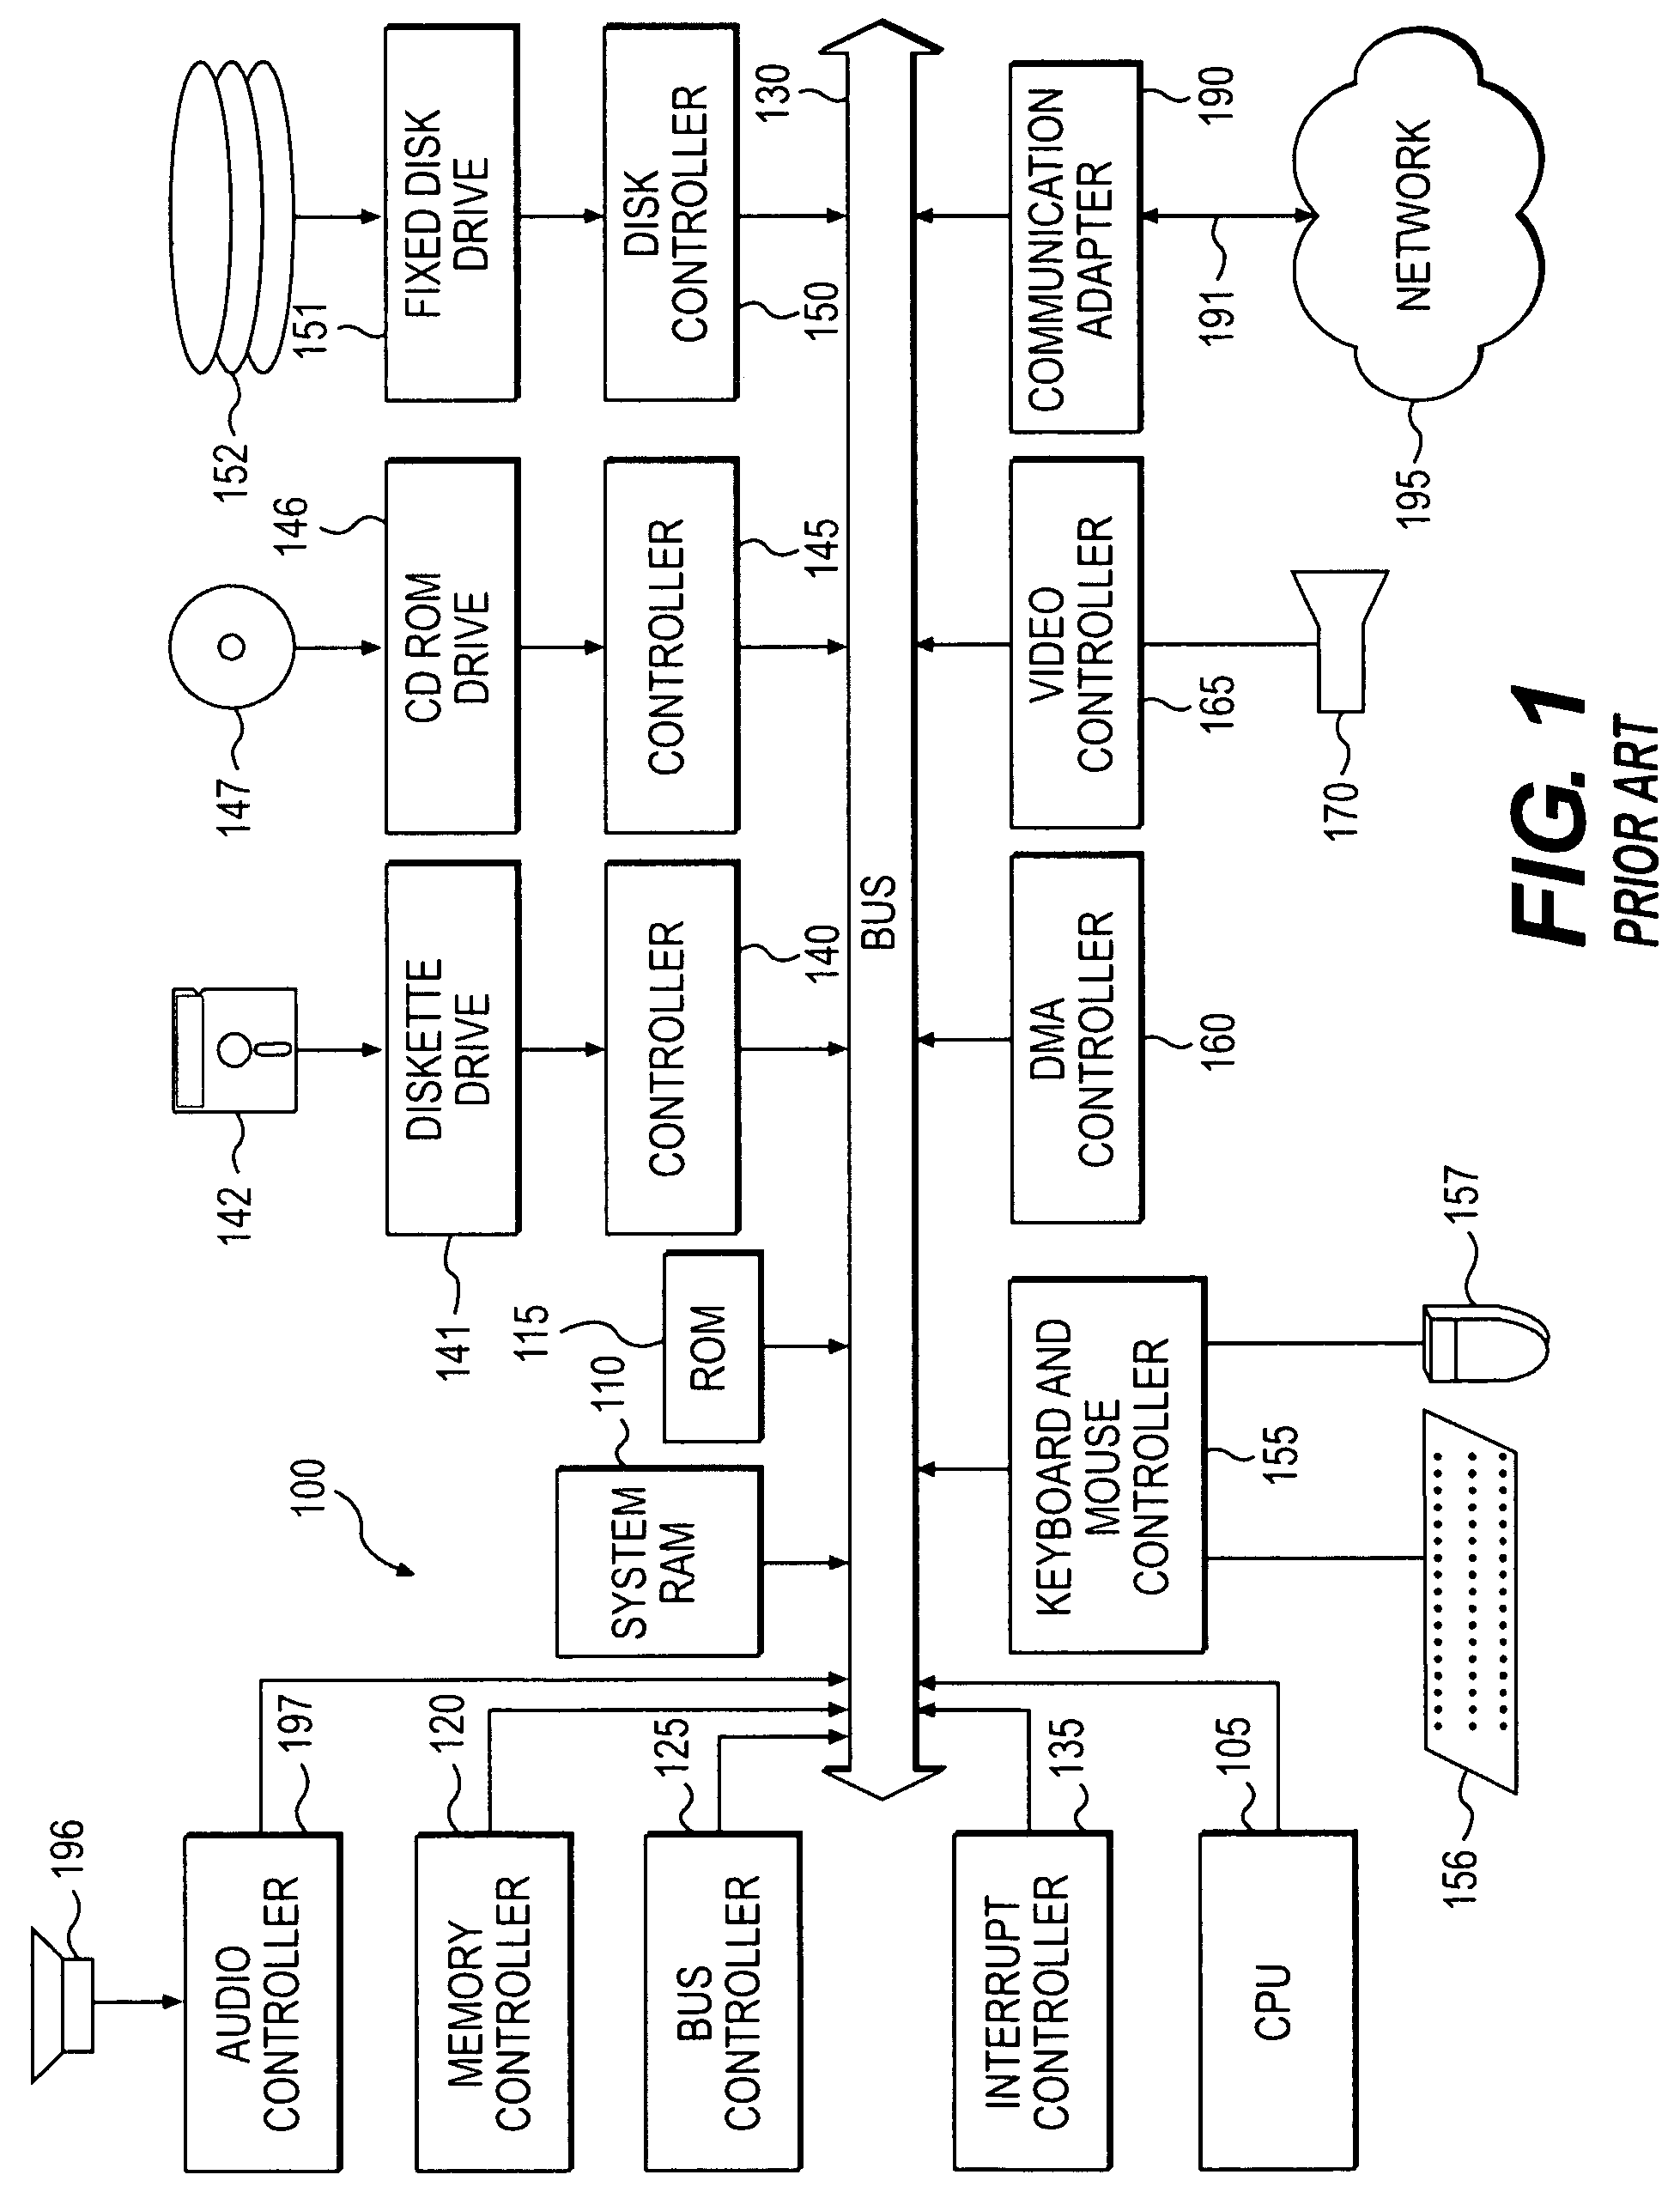 Method and apparatus for dynamically balancing call flow workloads in a telecommunications system